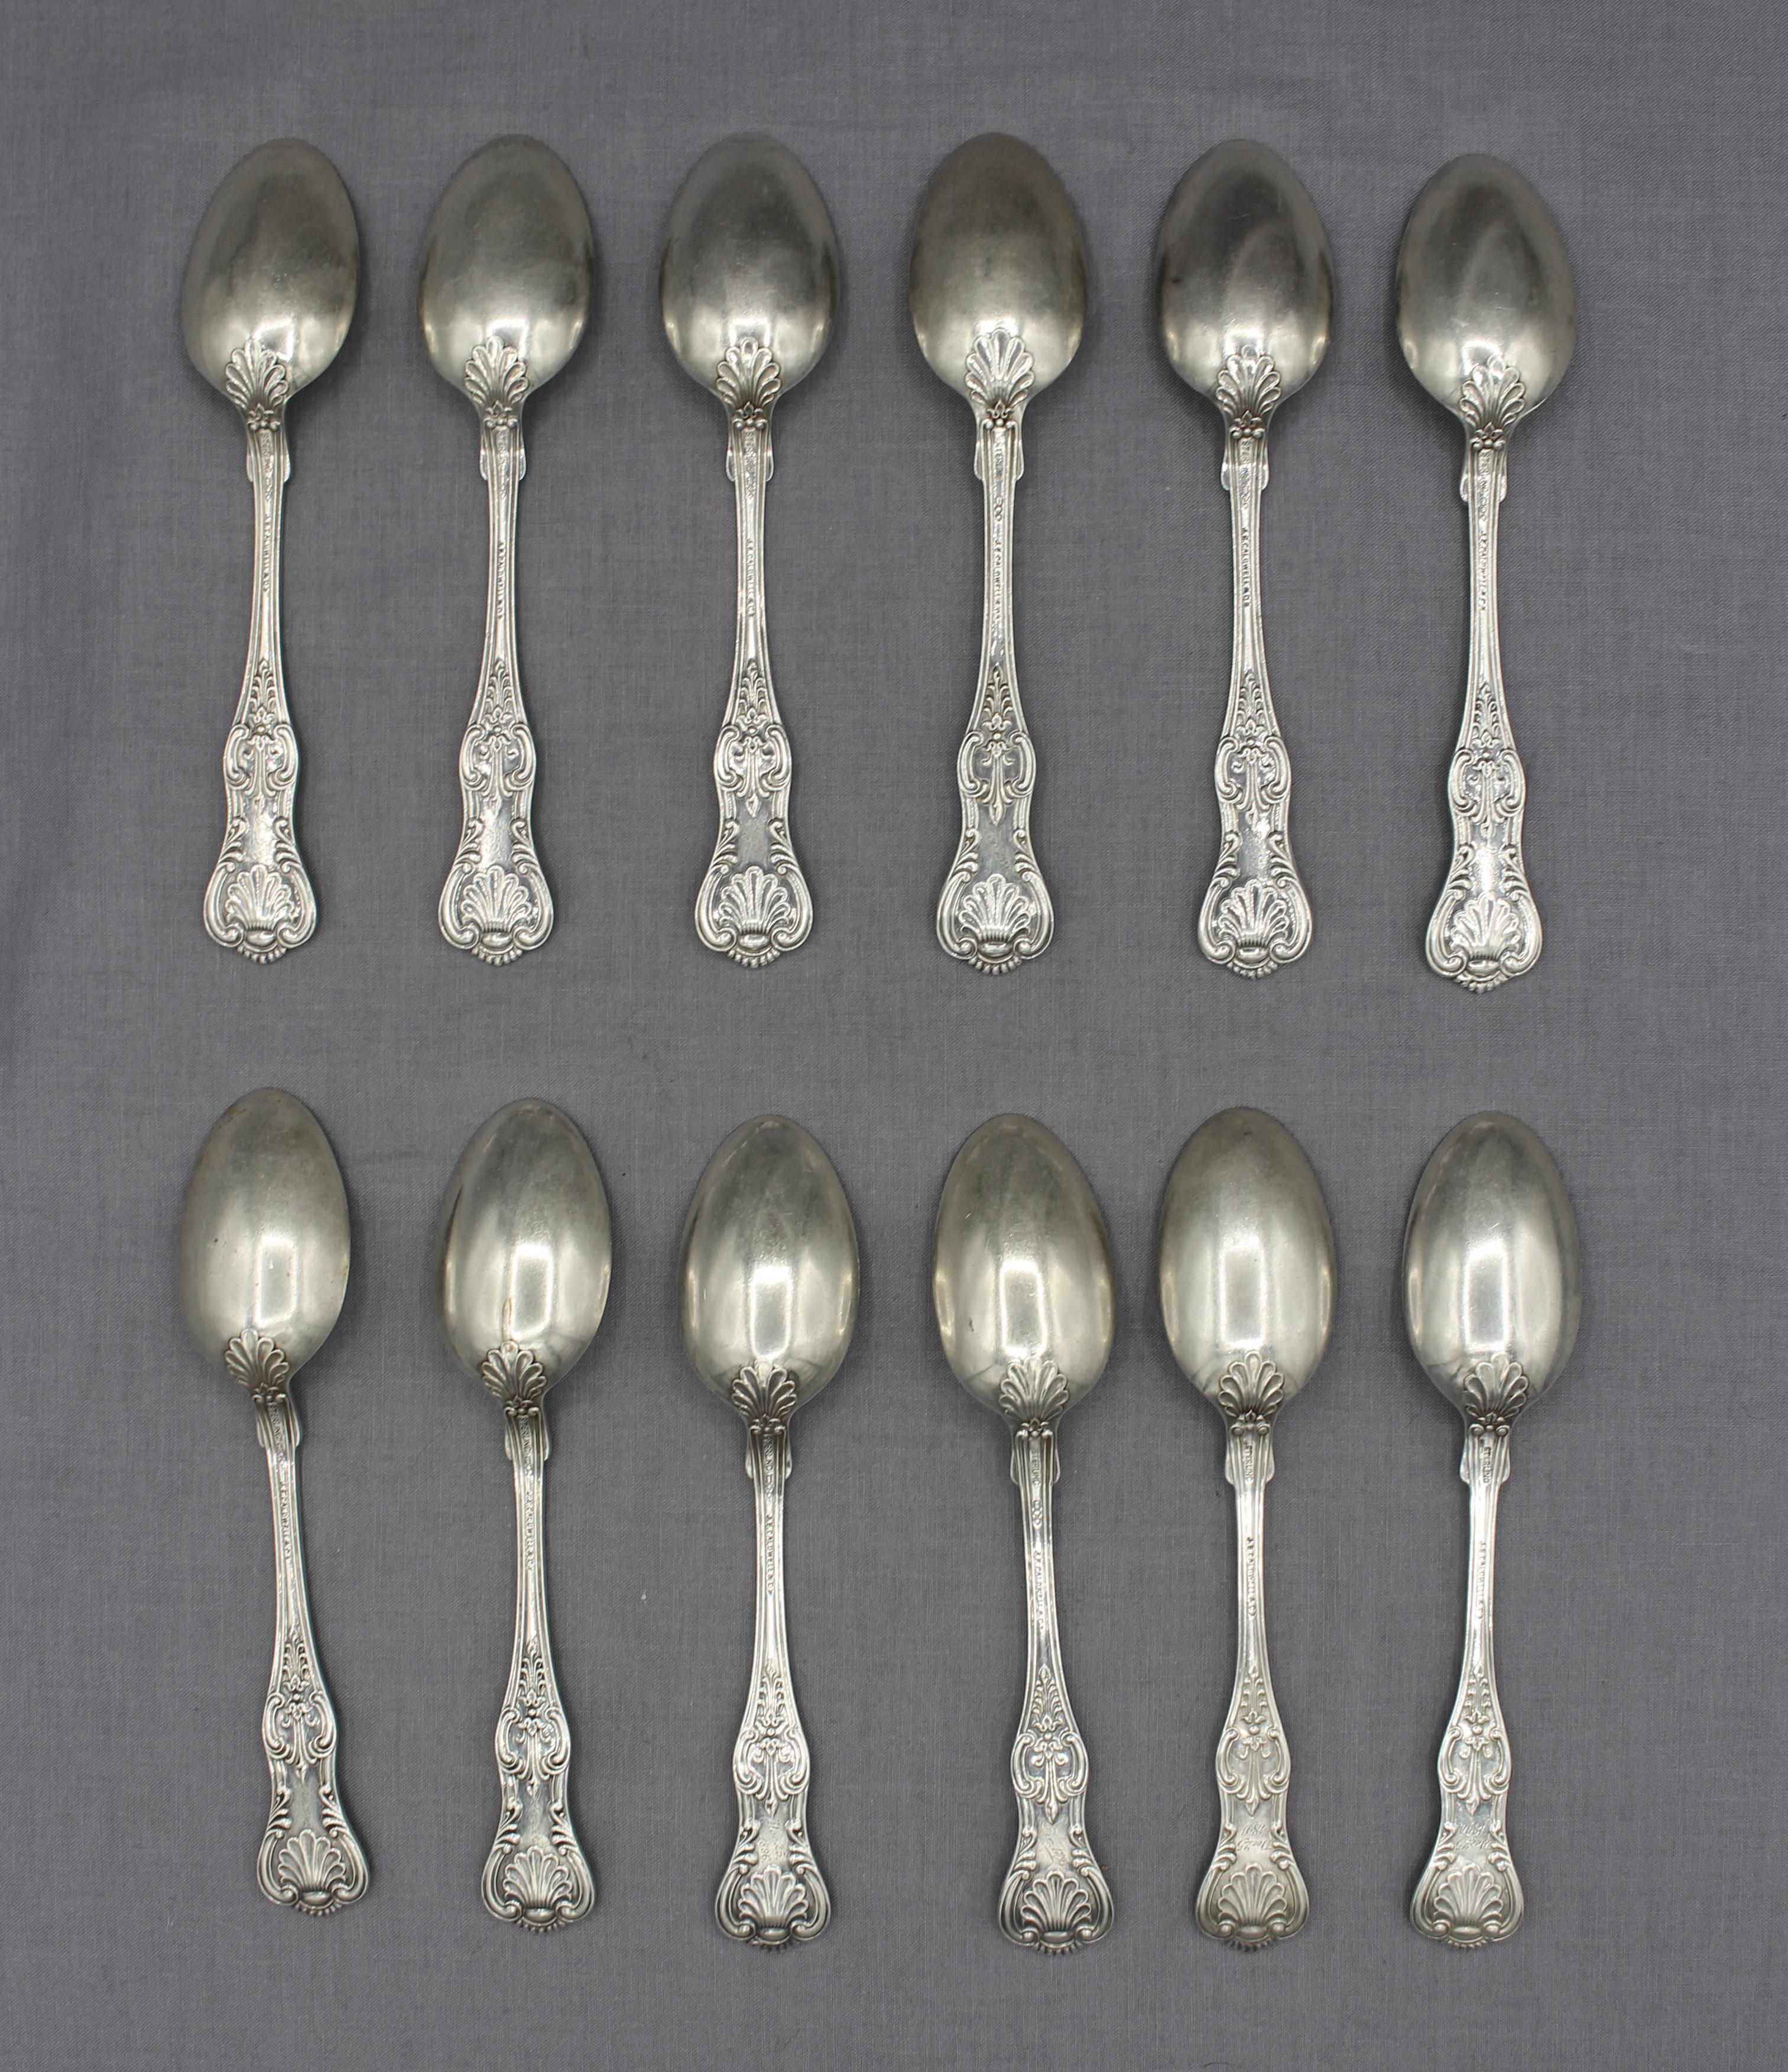 Matched set of 12 sterling silver teaspoons 